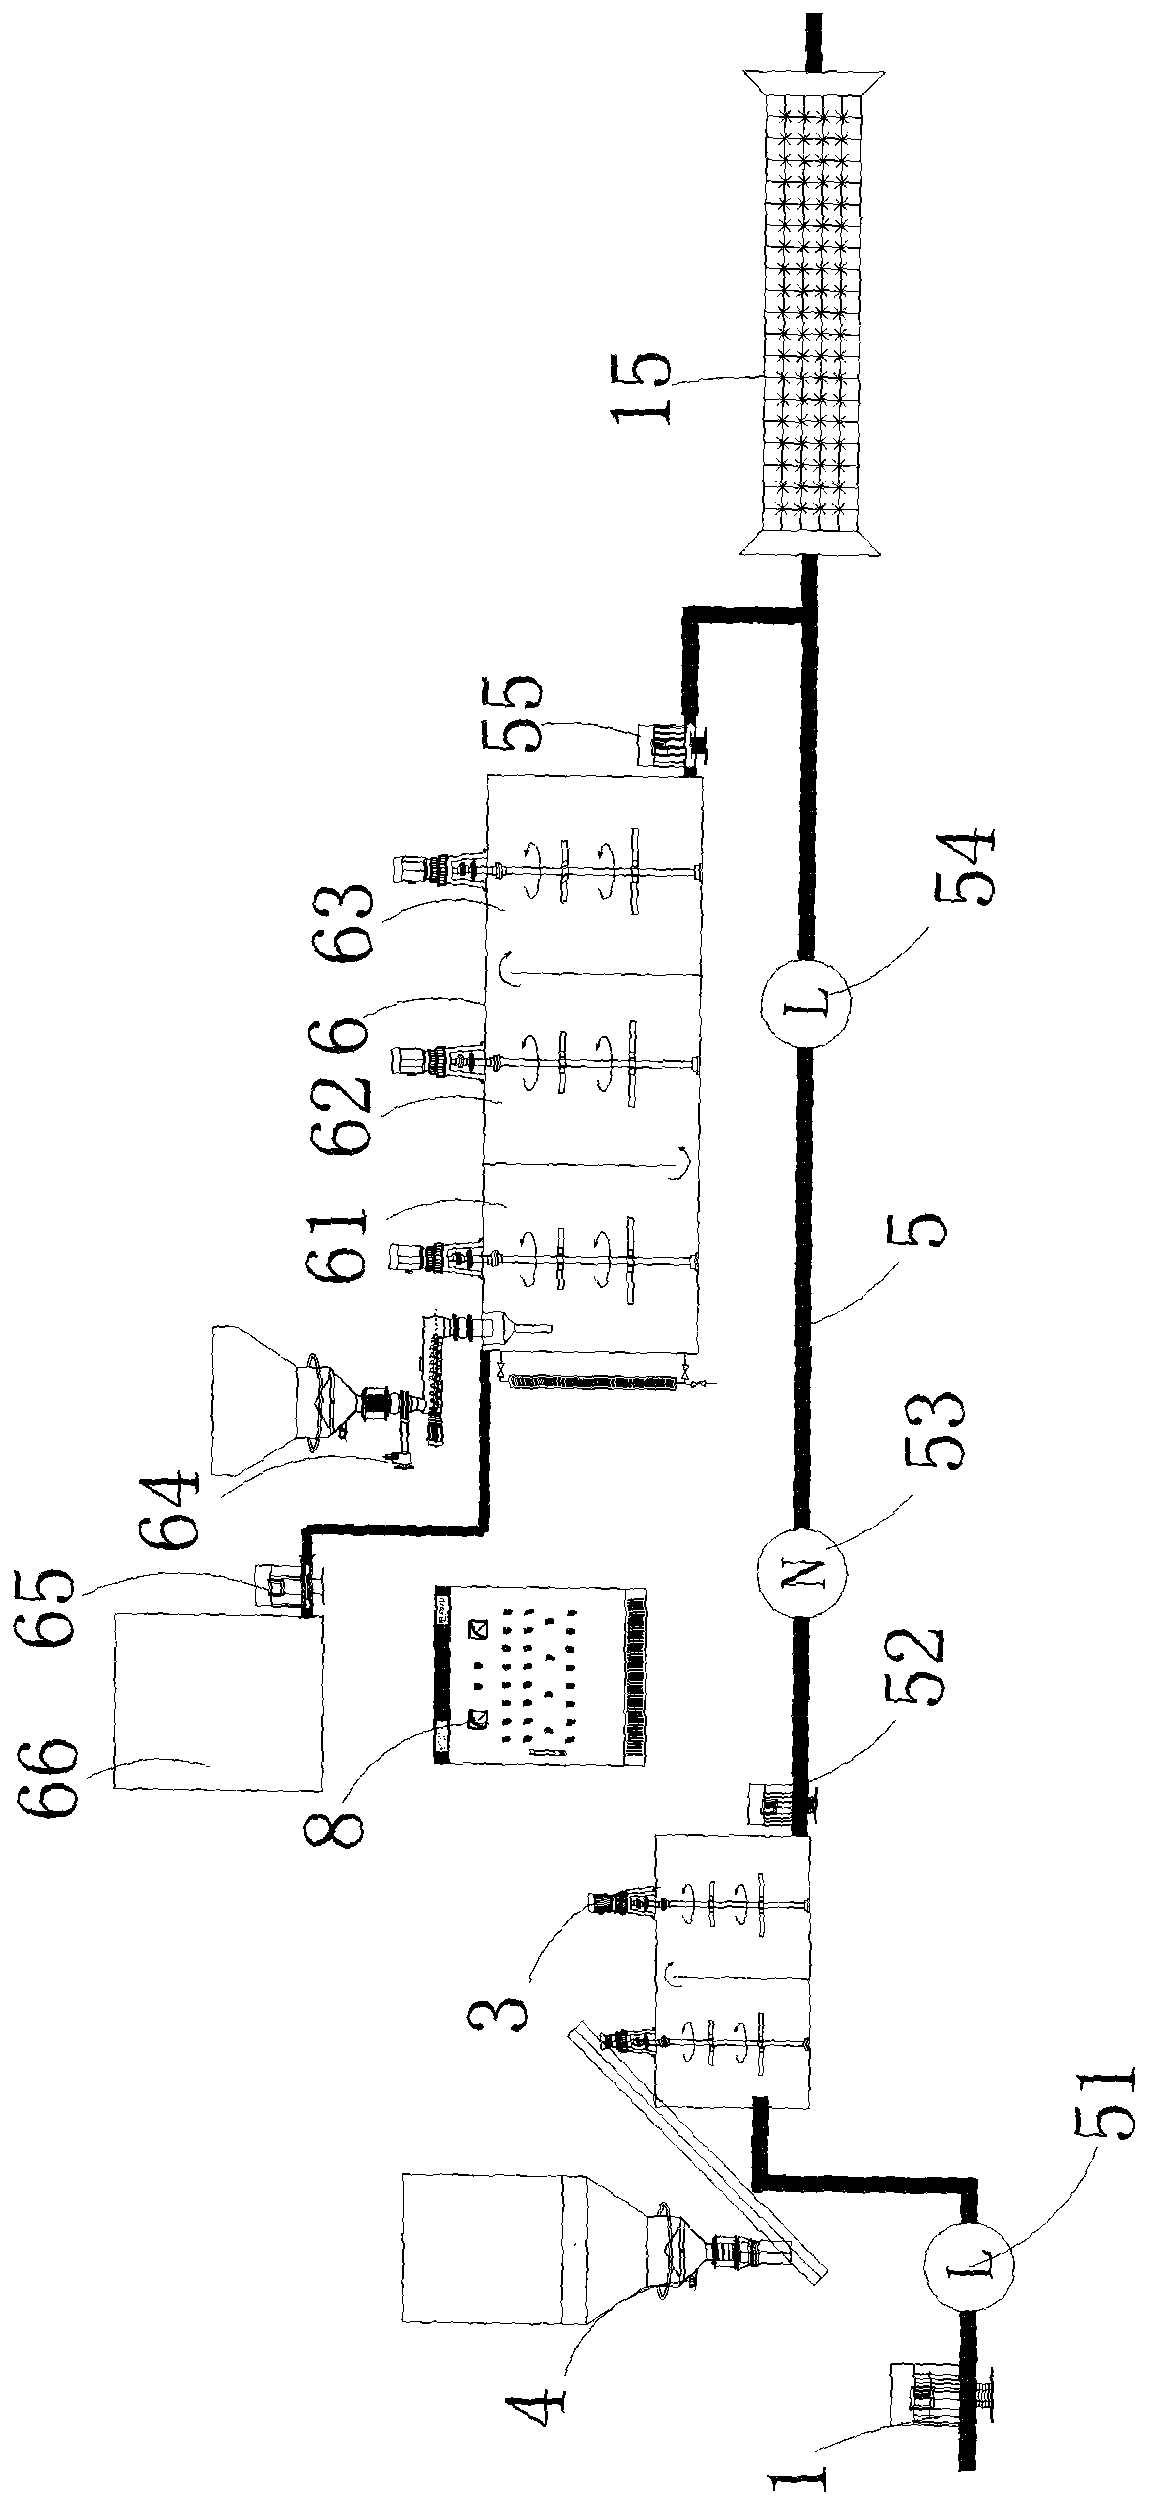 Rapid dewatering and curing method for sludge